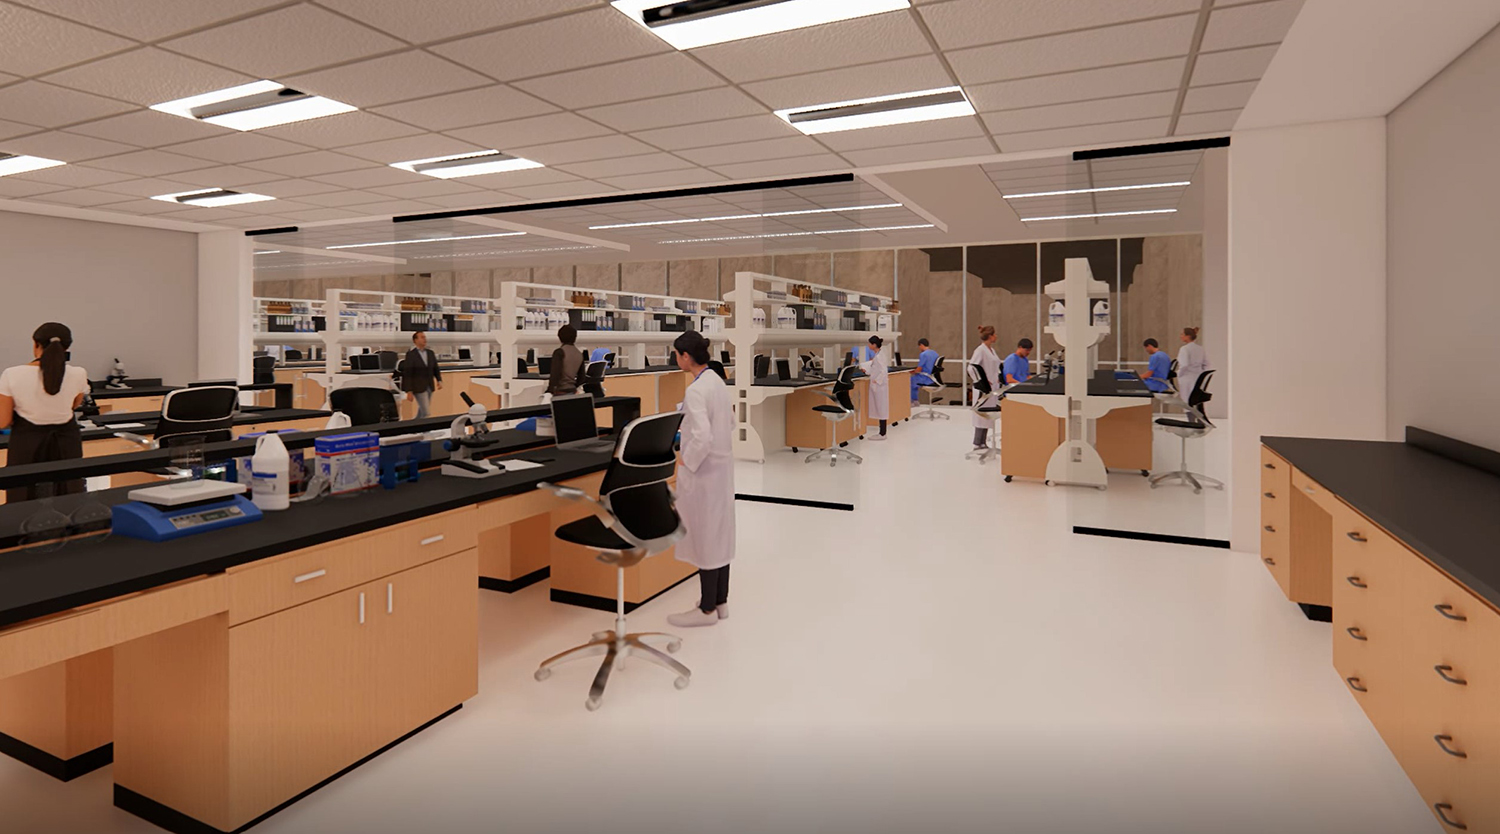 Laboratory Space at The Invert Chicago. Rendering by The Invert Chicago